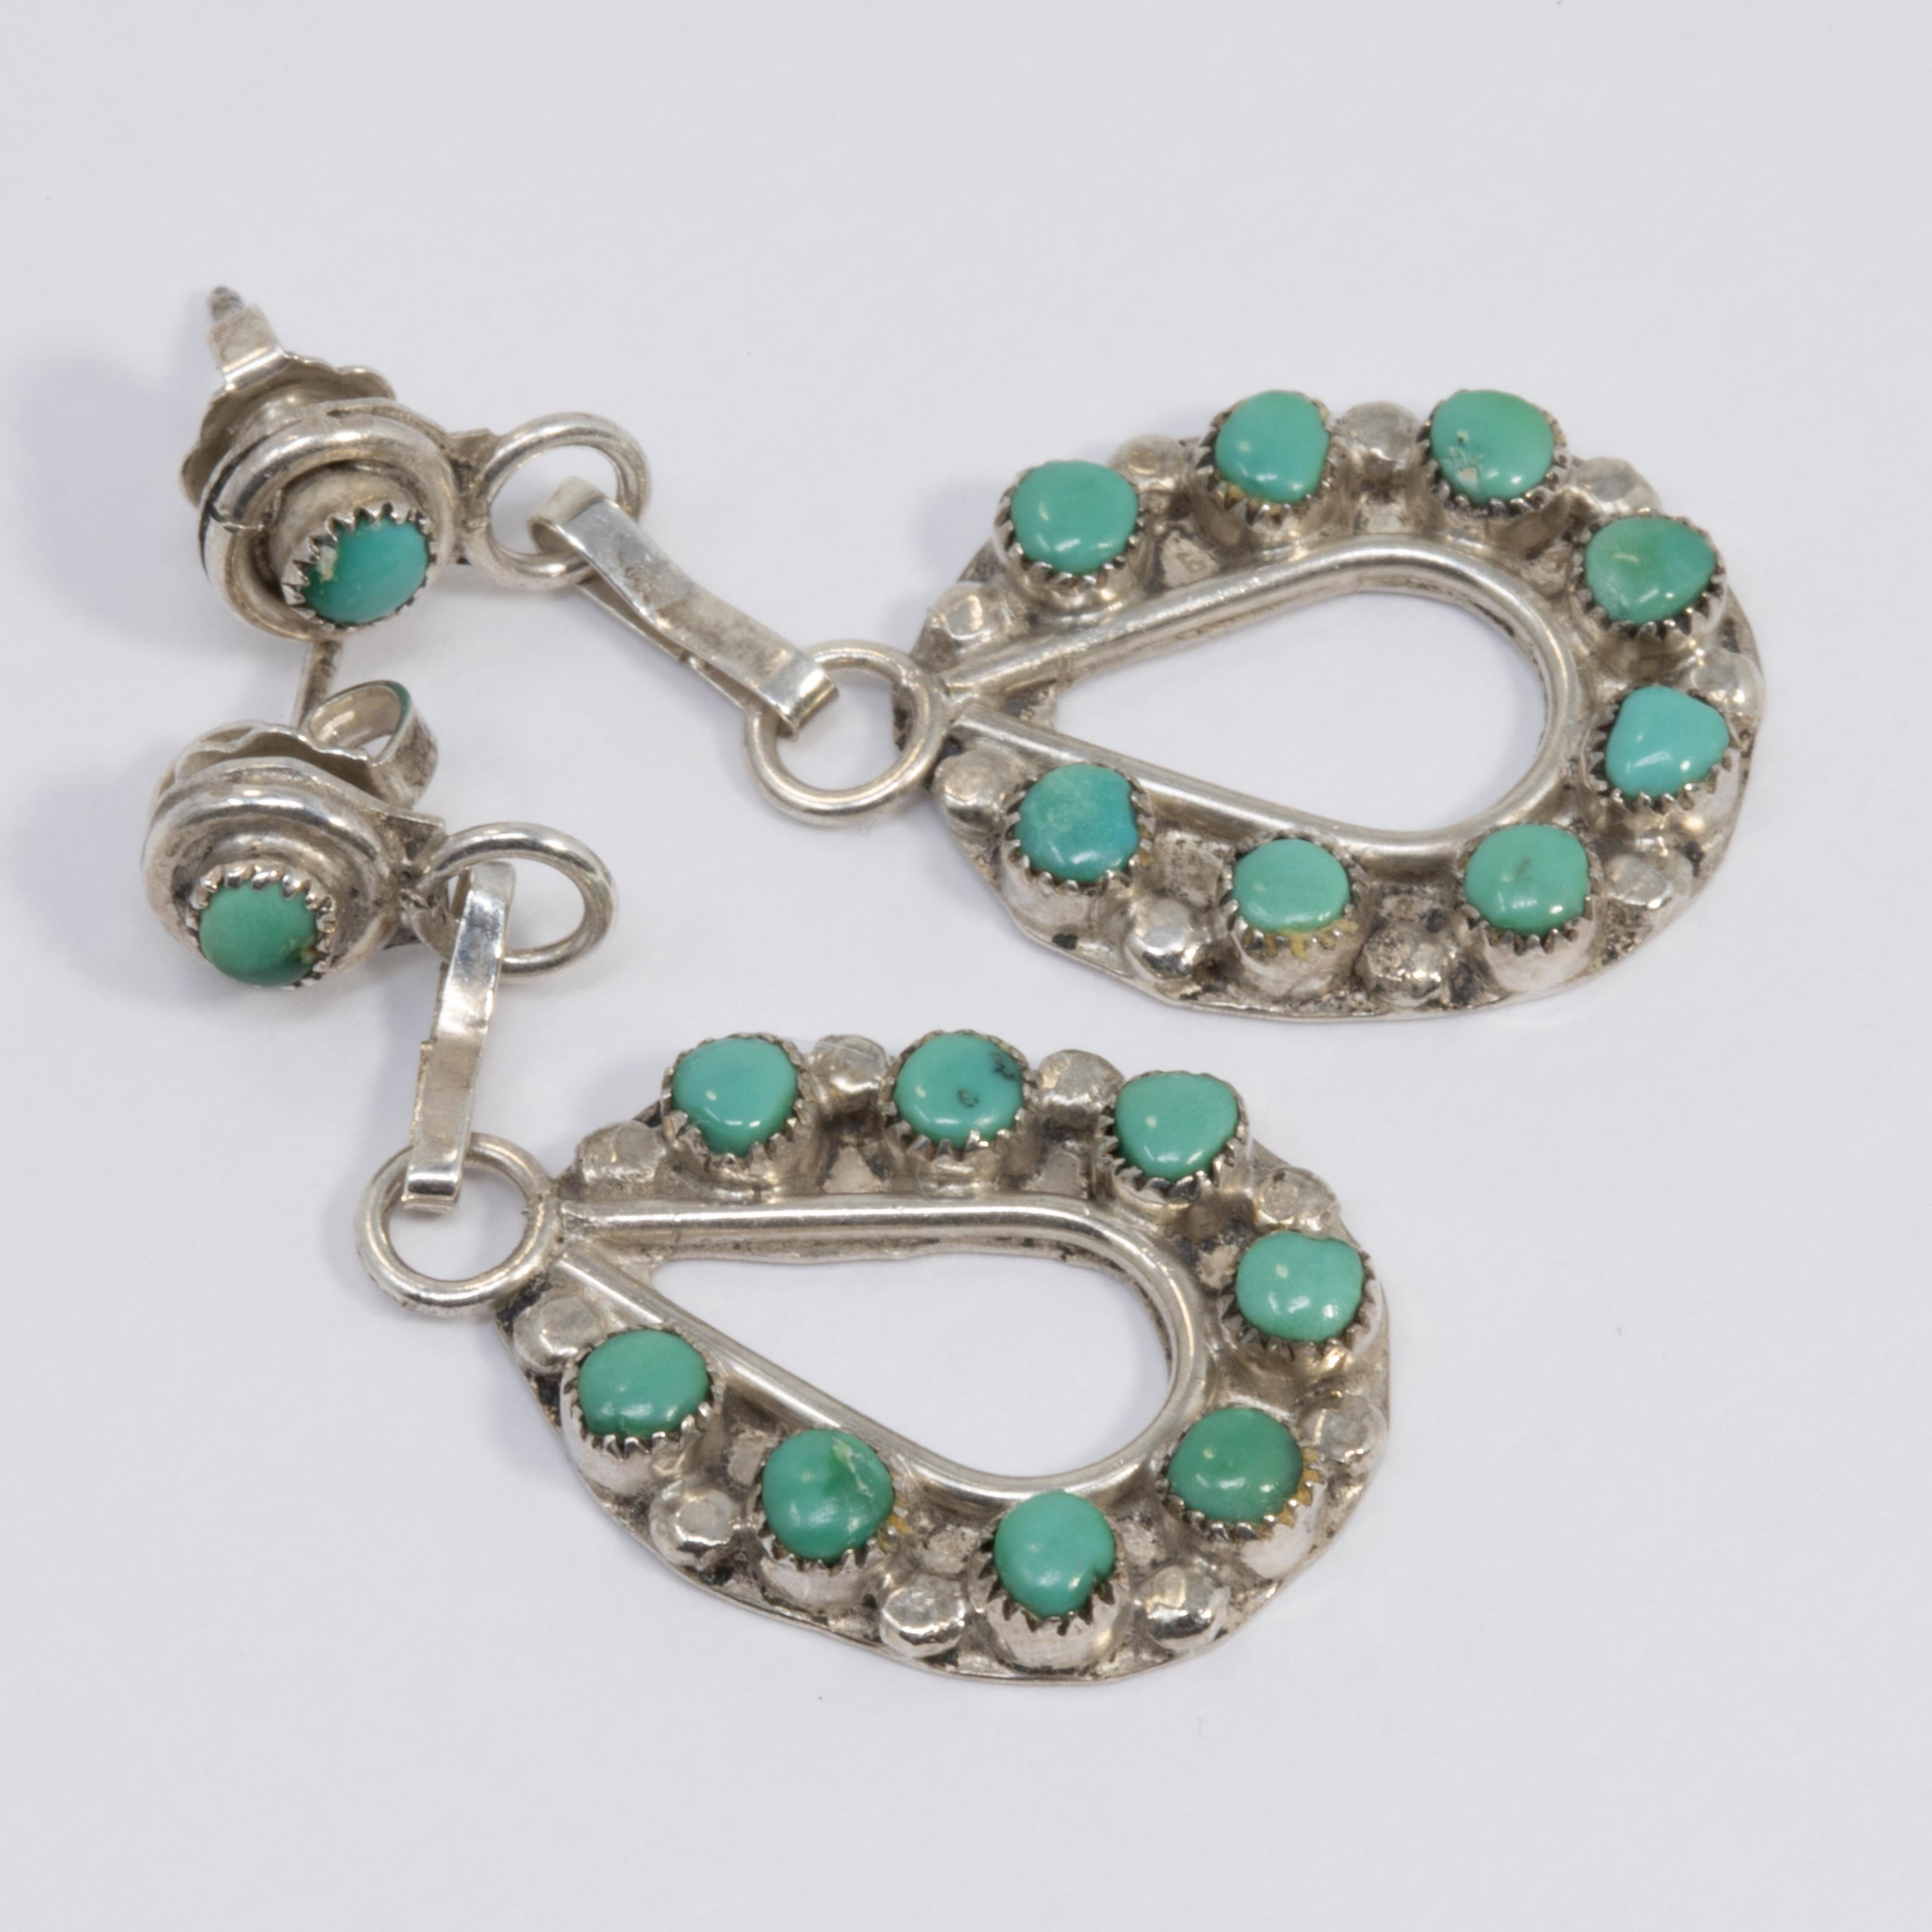  A pair of sterling silver earrings decorated with bezel-set, polished, turquoise beads. Danling style with post backs. Made by skilled Native American silversmiths, circa mid 1900s.

Hallmarks: Sterling